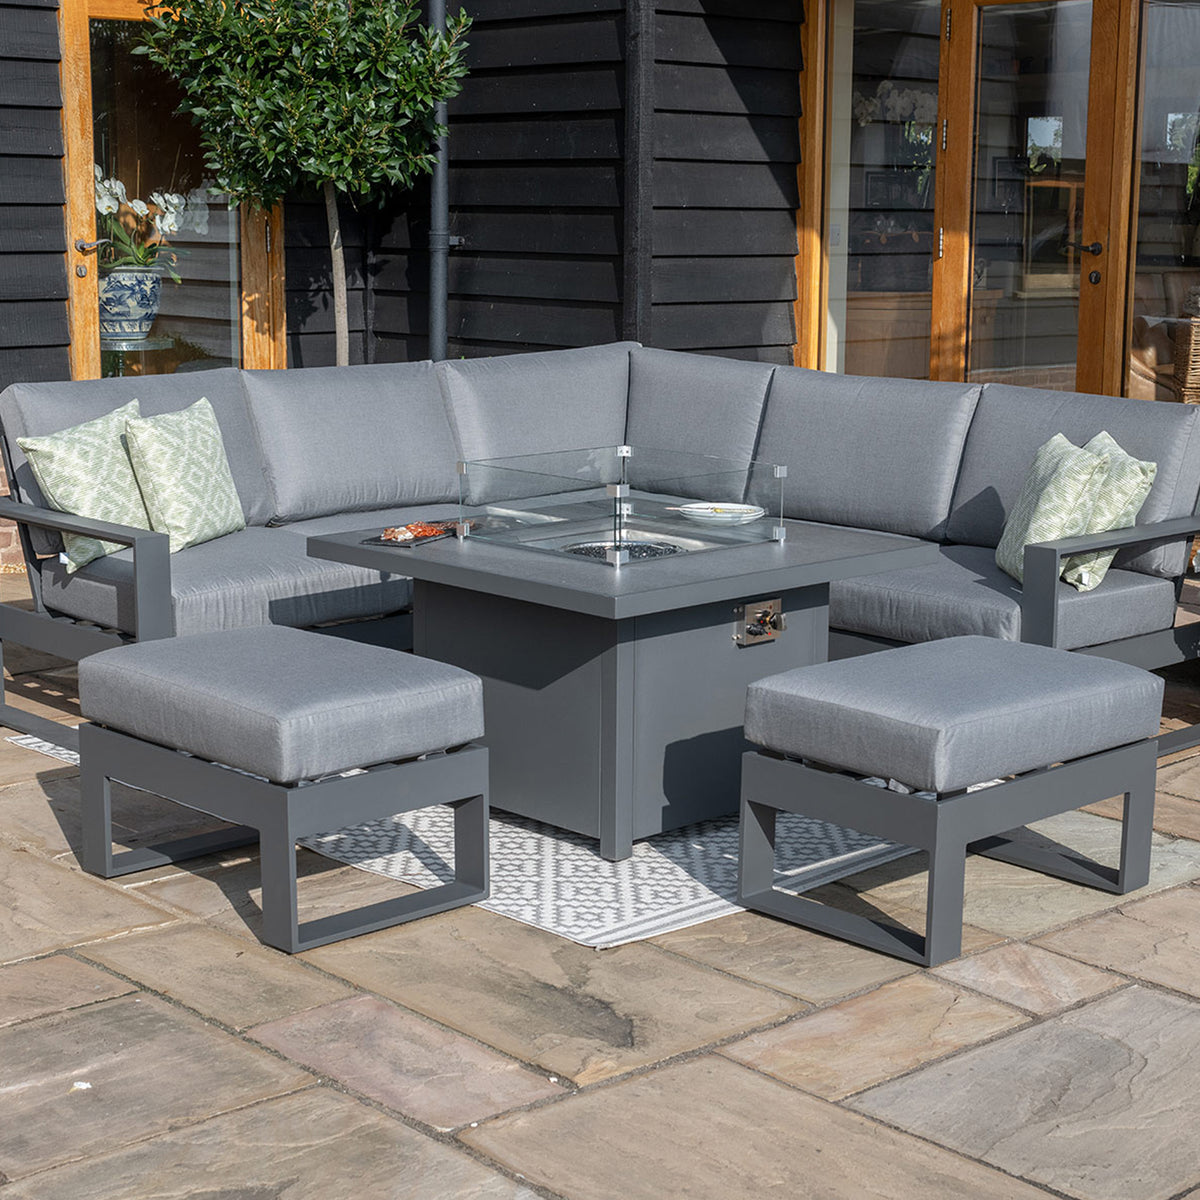 Maze Amalfi Grey Small Outdoor Corner Dining with Square Fire Pit Table from Roseland Furniture